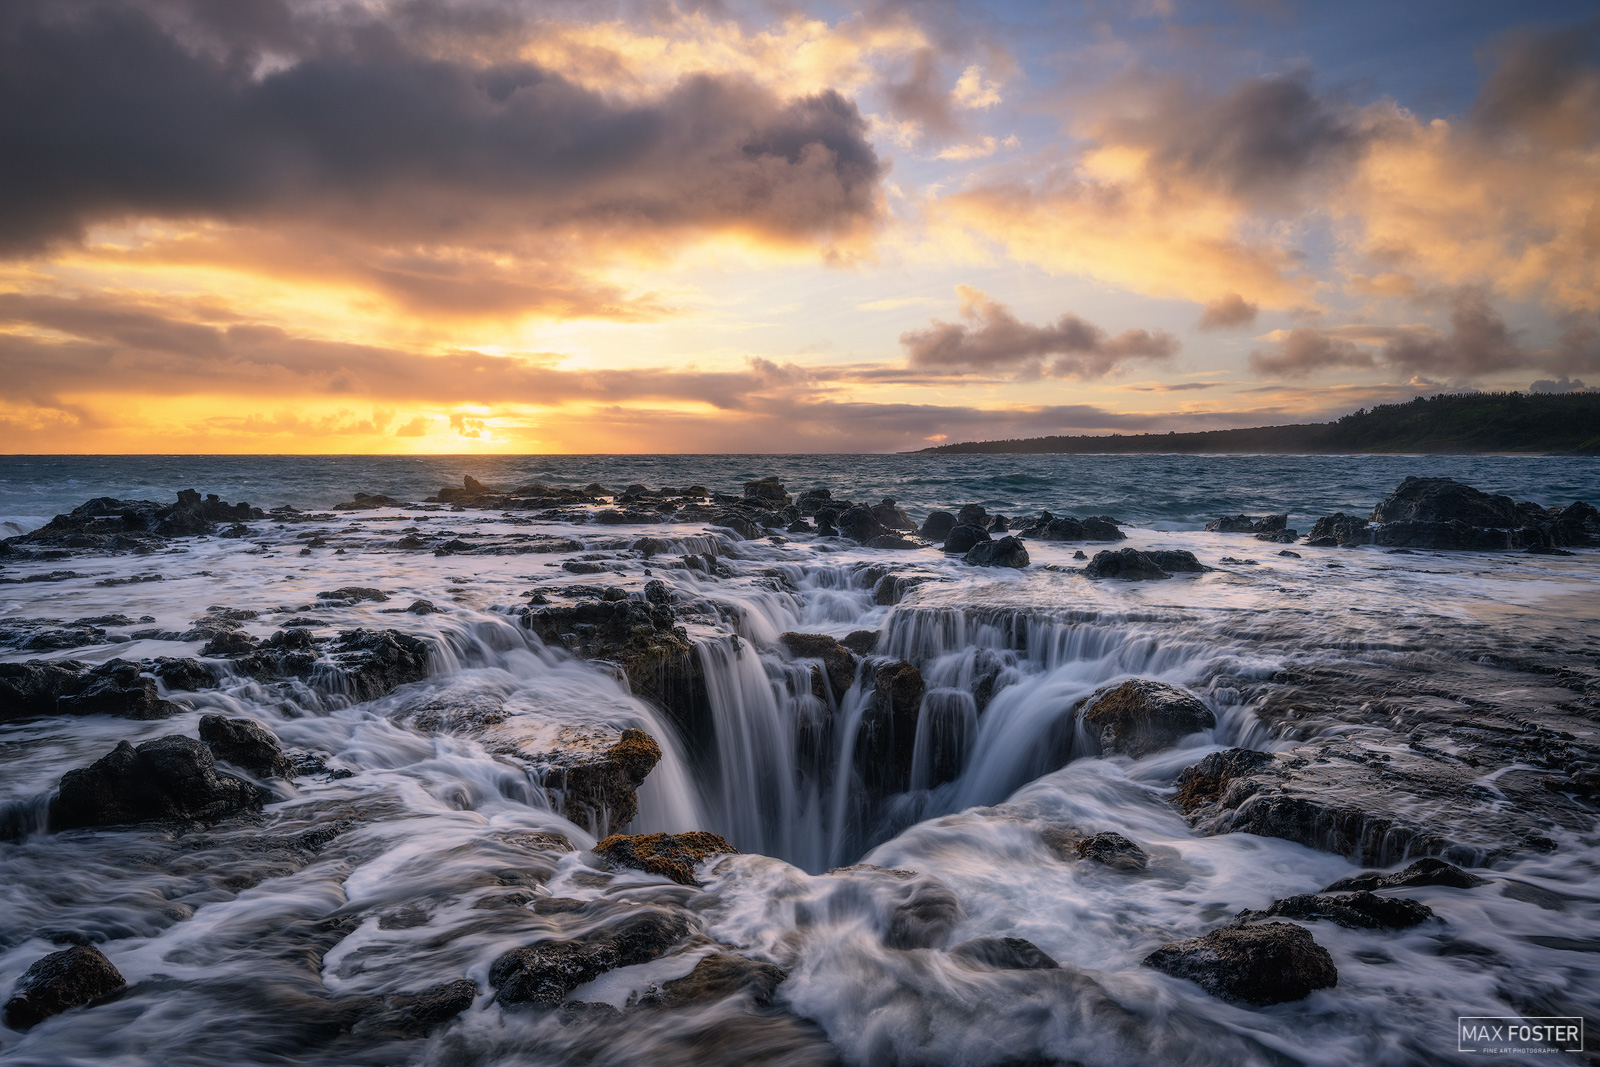 Bring nature into your home with Ocean Eye, Max Foster's limited edition photography print off the coast of Kauai from his Hawaii...